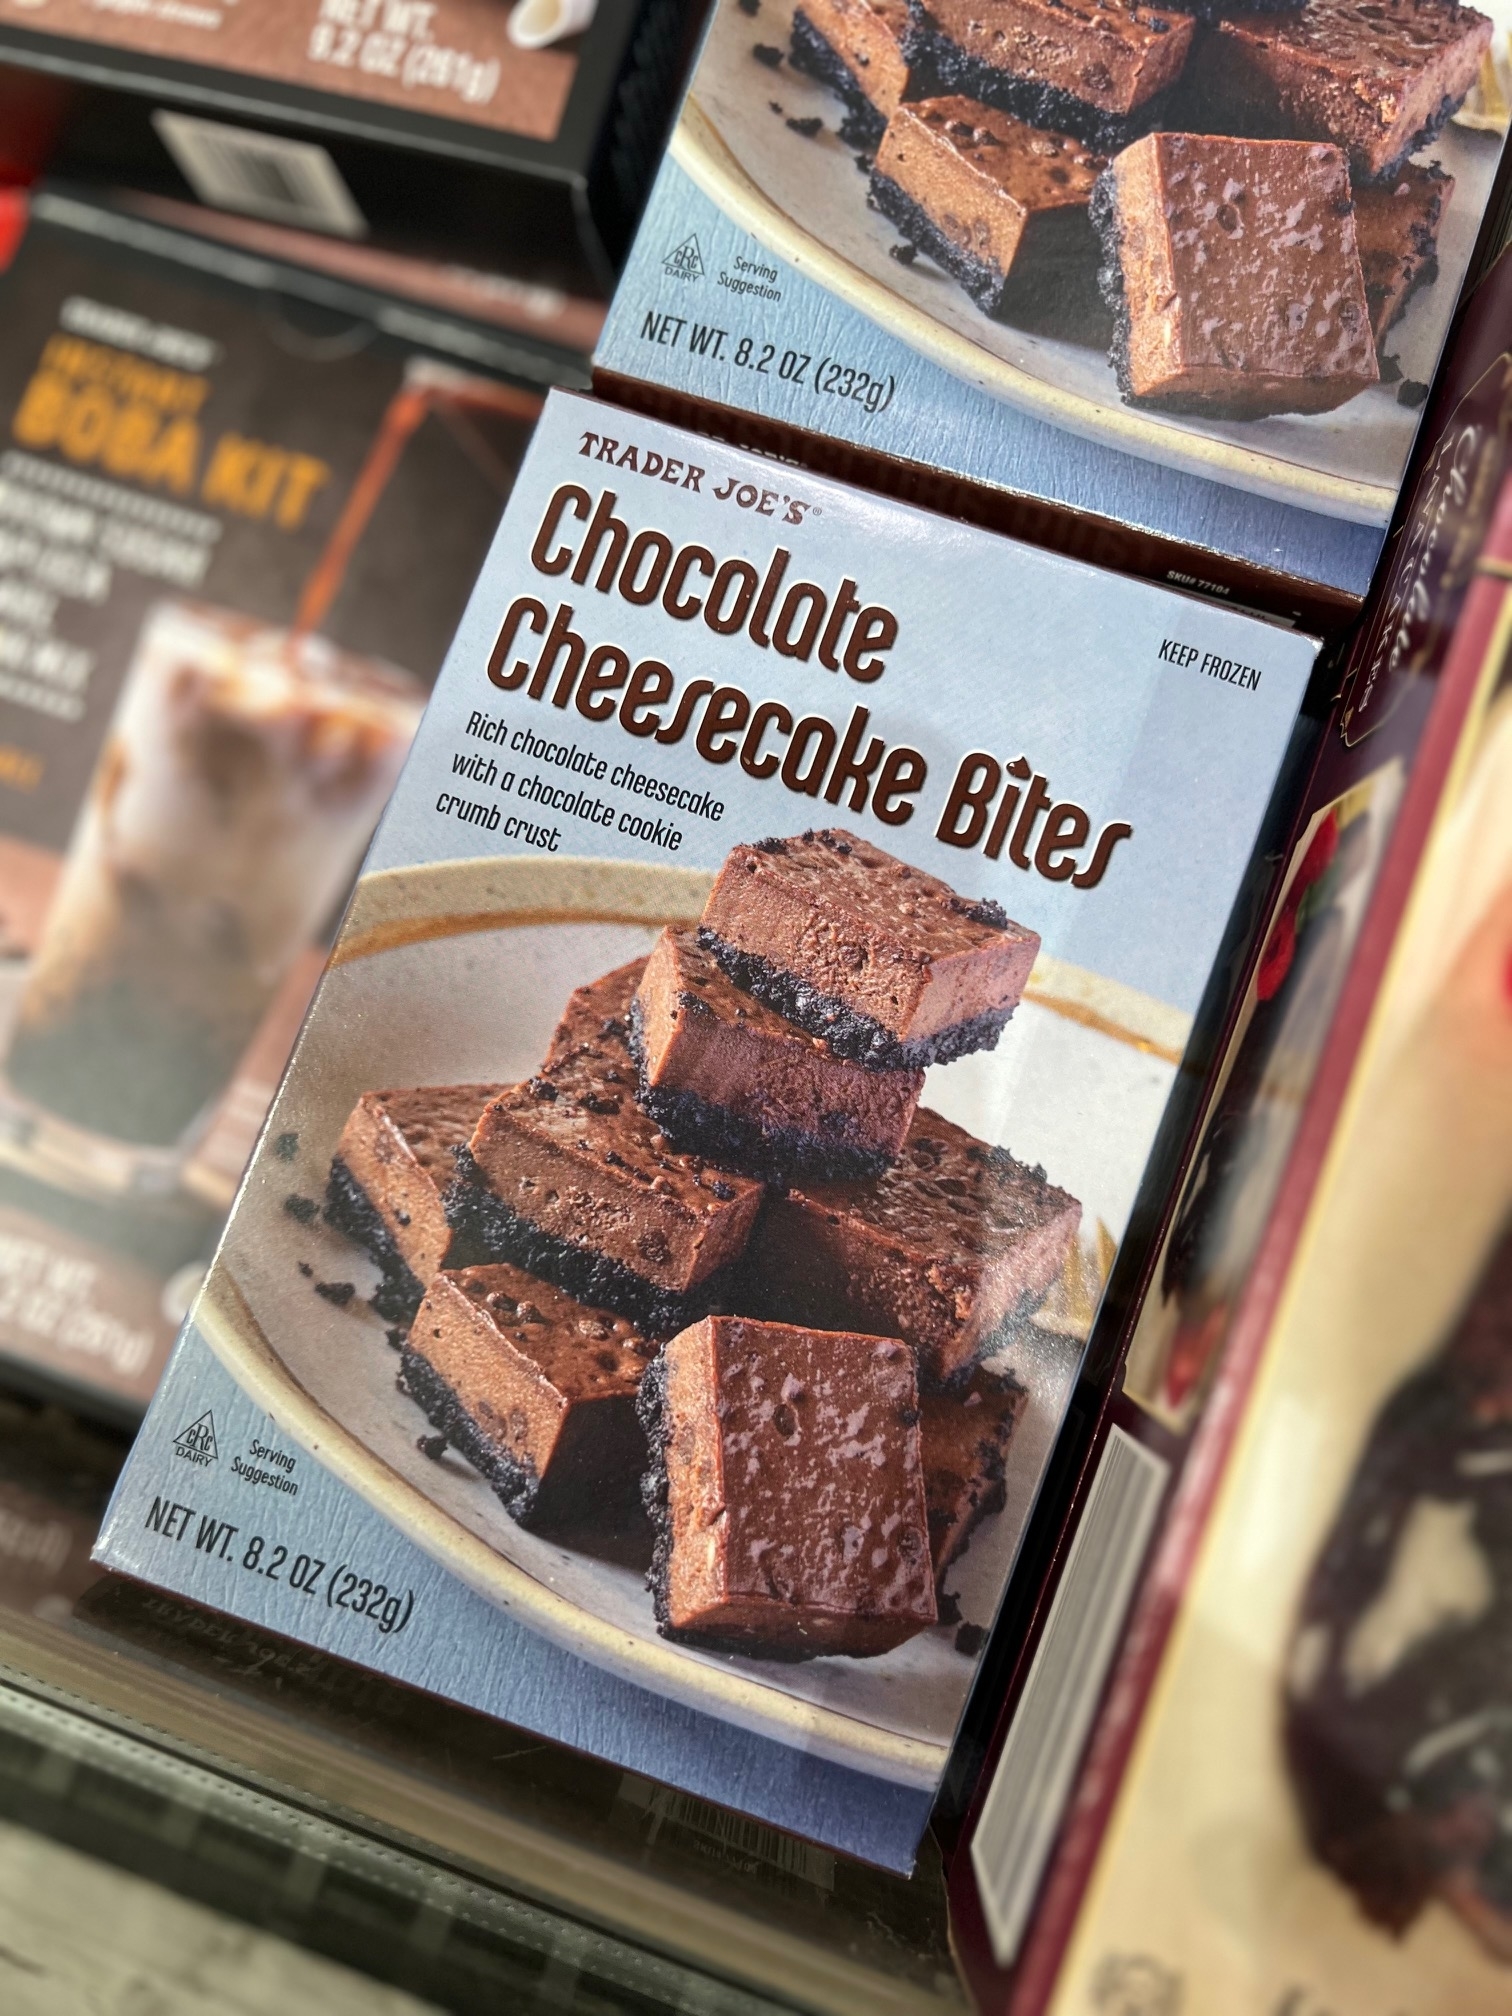 Box of Trader Joe&#x27;s Chocolate Cheesecake Bites with image of dessert on packaging